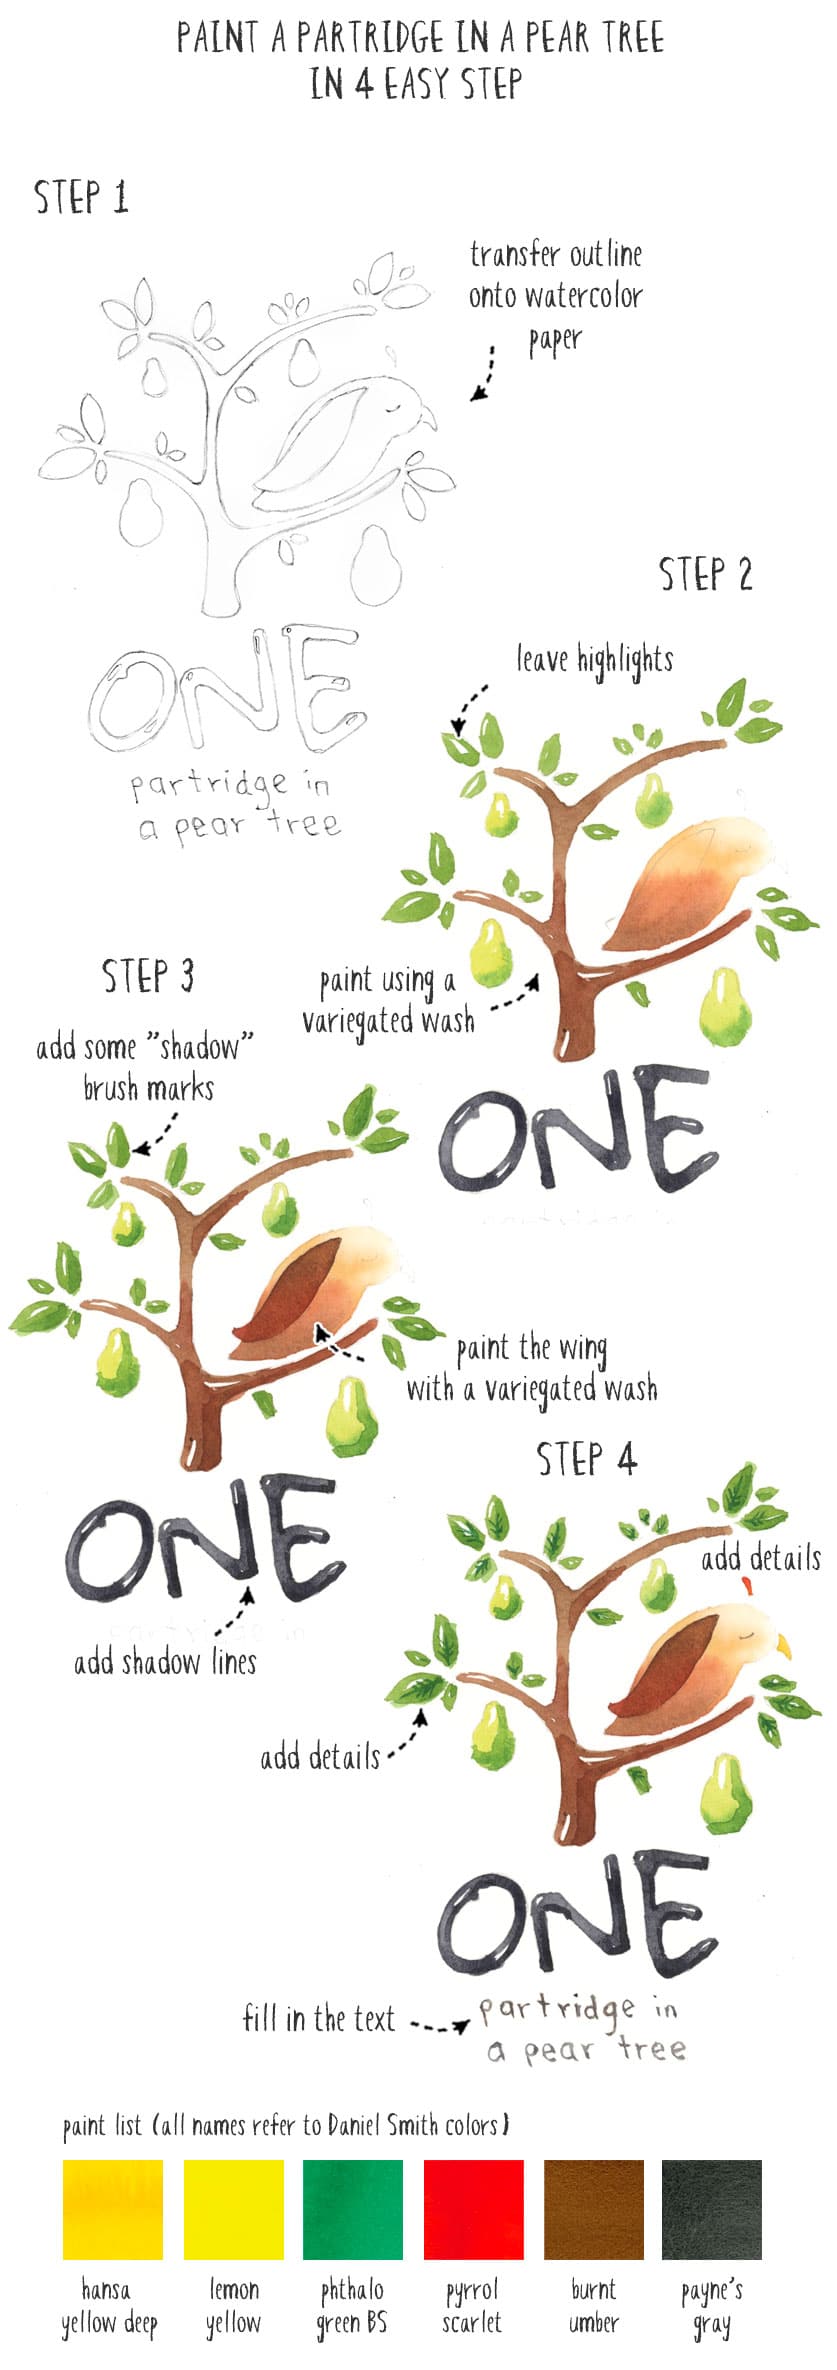 partridge in a pear tree 4 step painting process